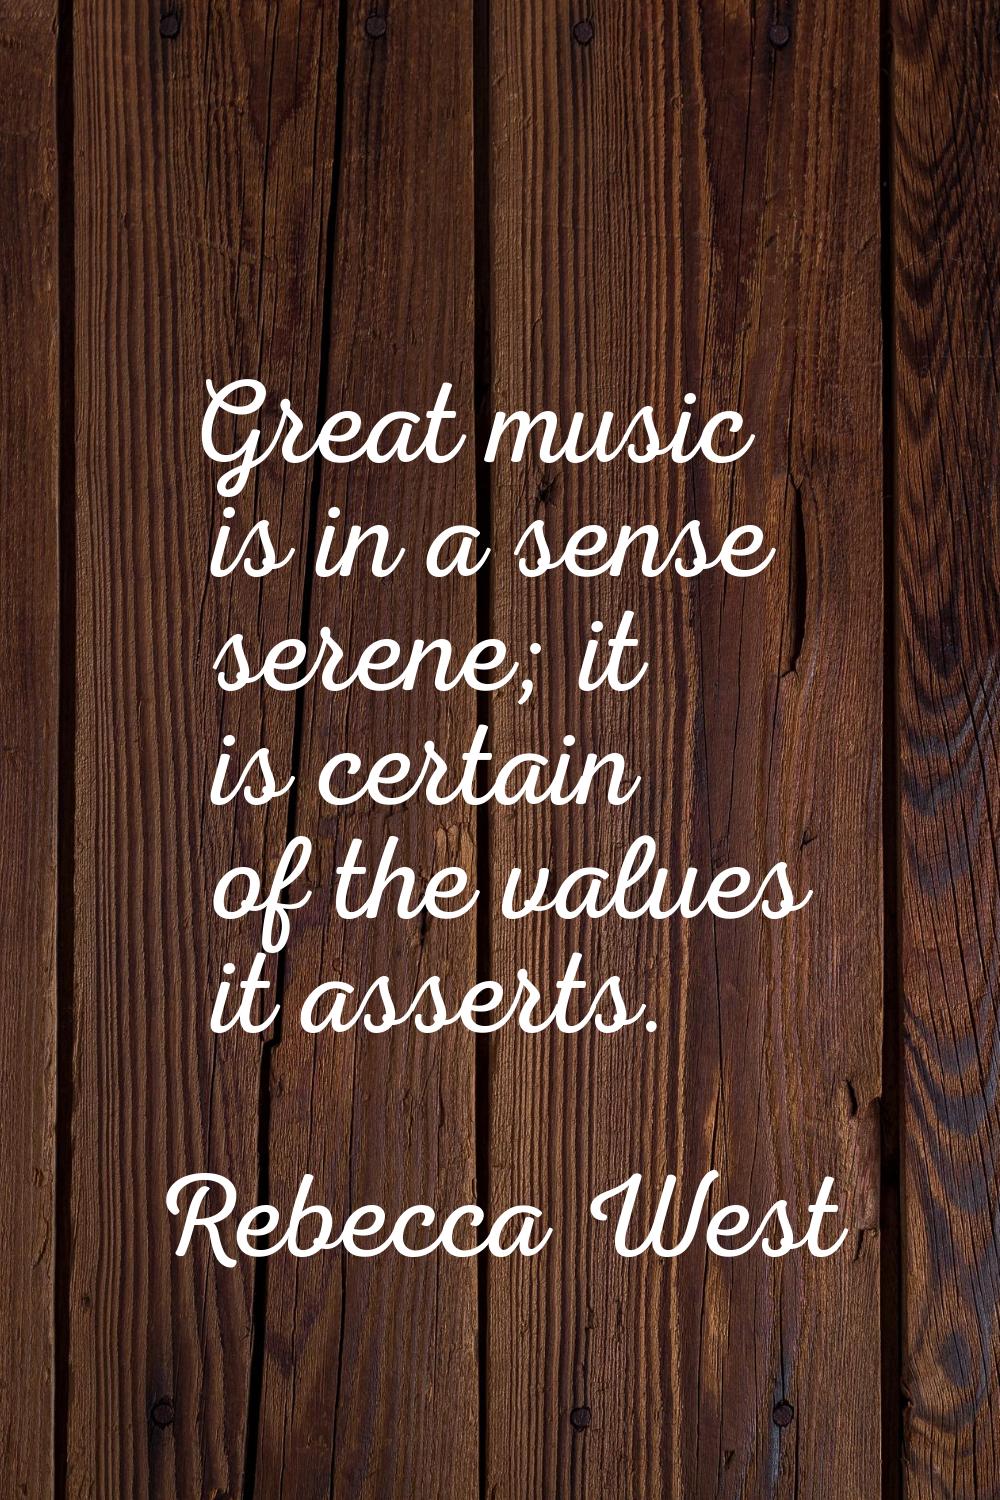 Great music is in a sense serene; it is certain of the values it asserts.